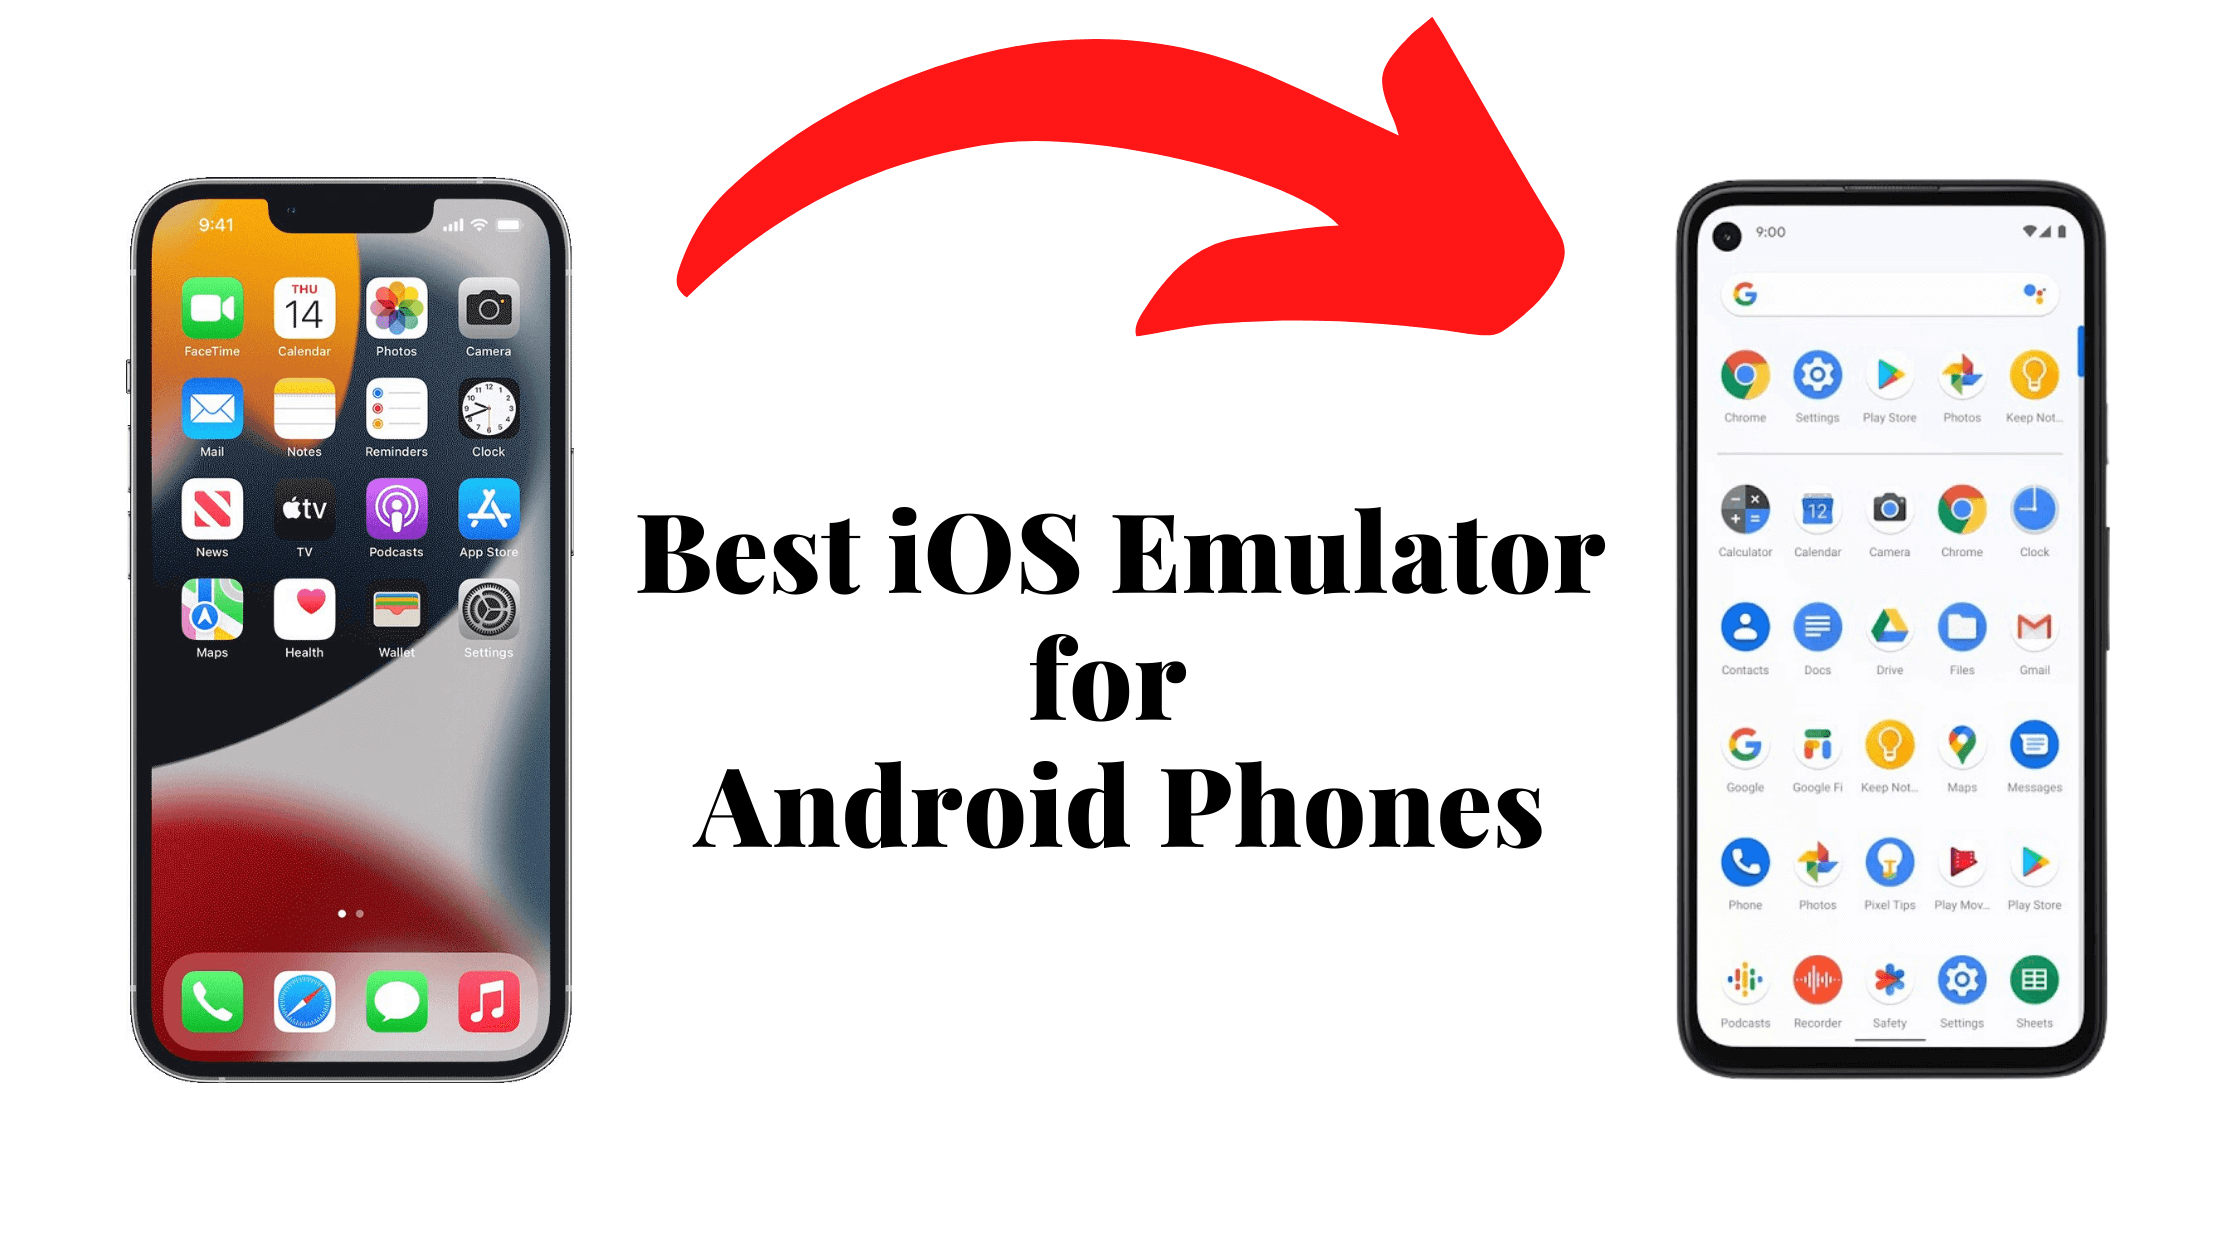 best ios emulator for android, ios emulator for android